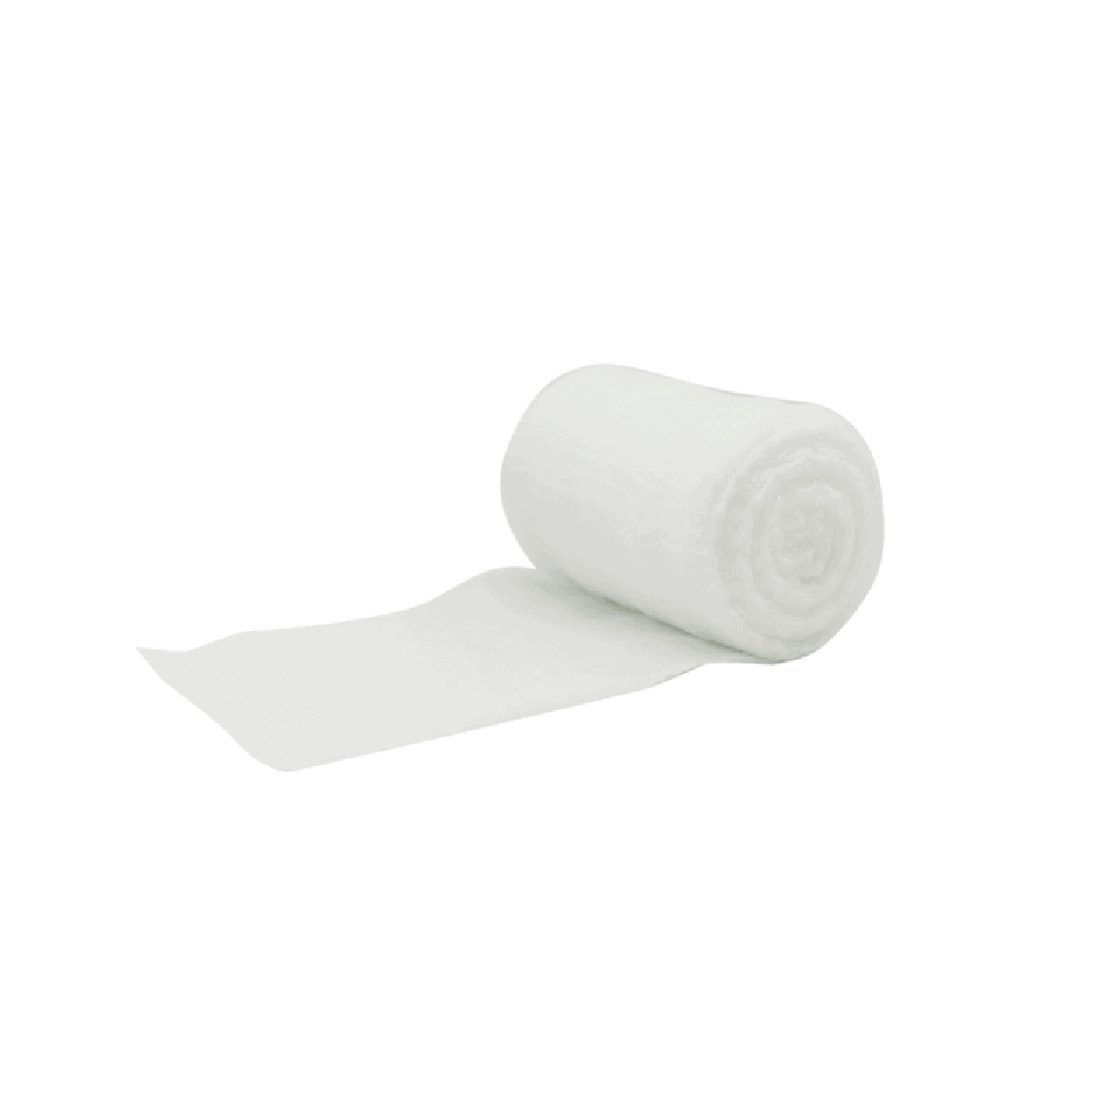 Conforming stretch bandages, relaxed length, individually wrapped, 7.6 cm x 1.8 m (3 in. x 2 yds)